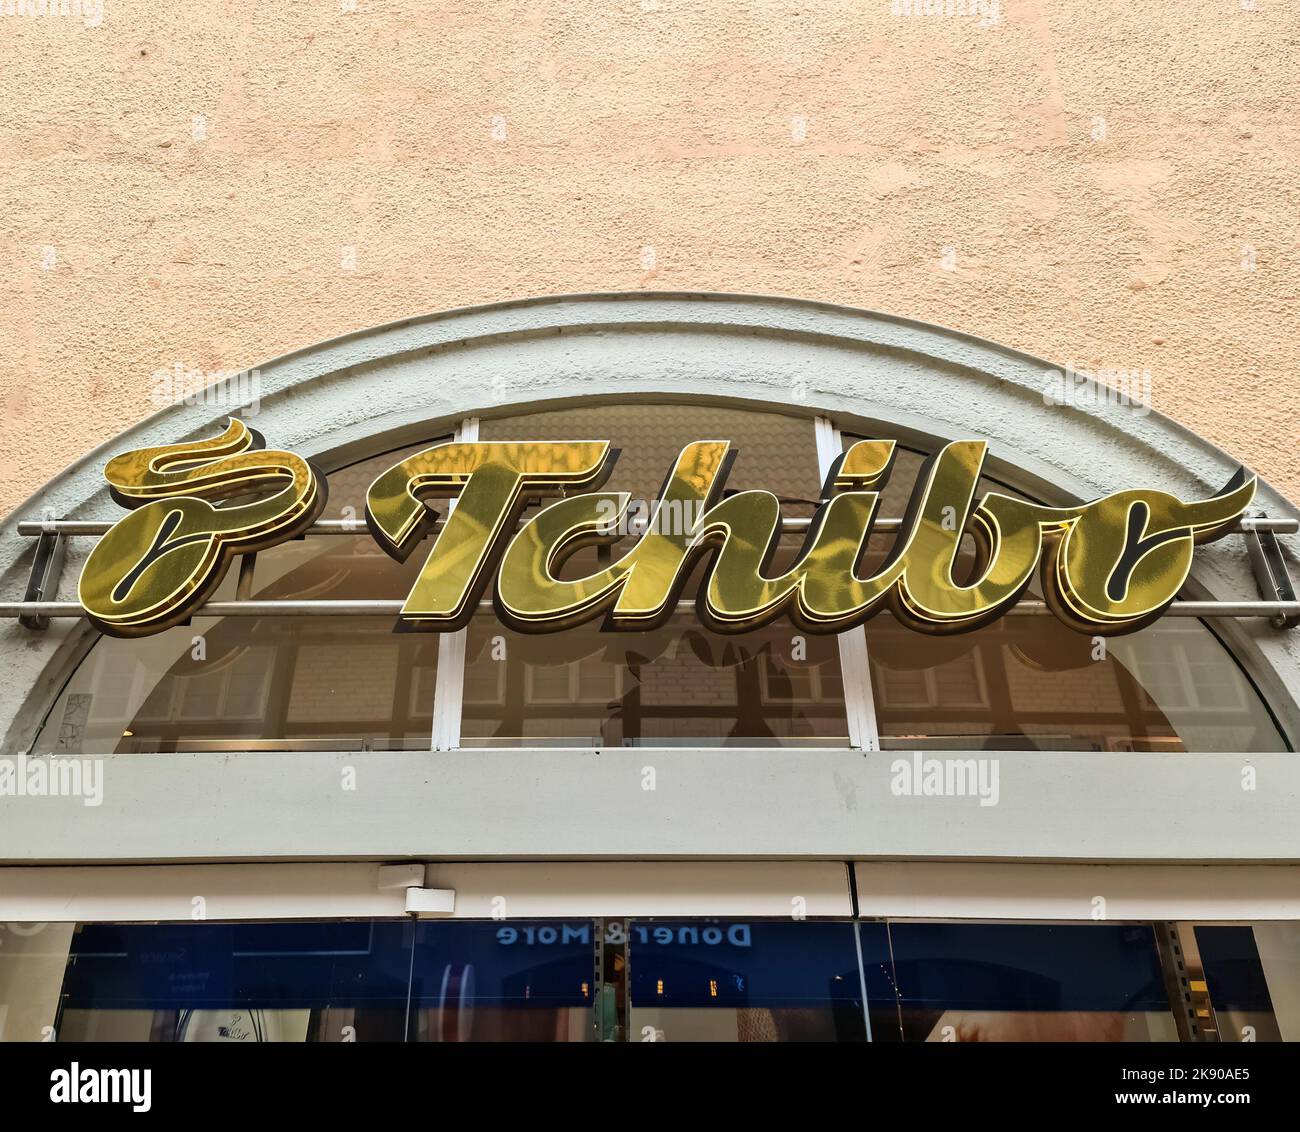 https://c8.alamy.com/comp/2K90AE5/a-large-golden-logo-of-the-tchibo-coffee-company-above-the-entrance-2K90AE5.jpg